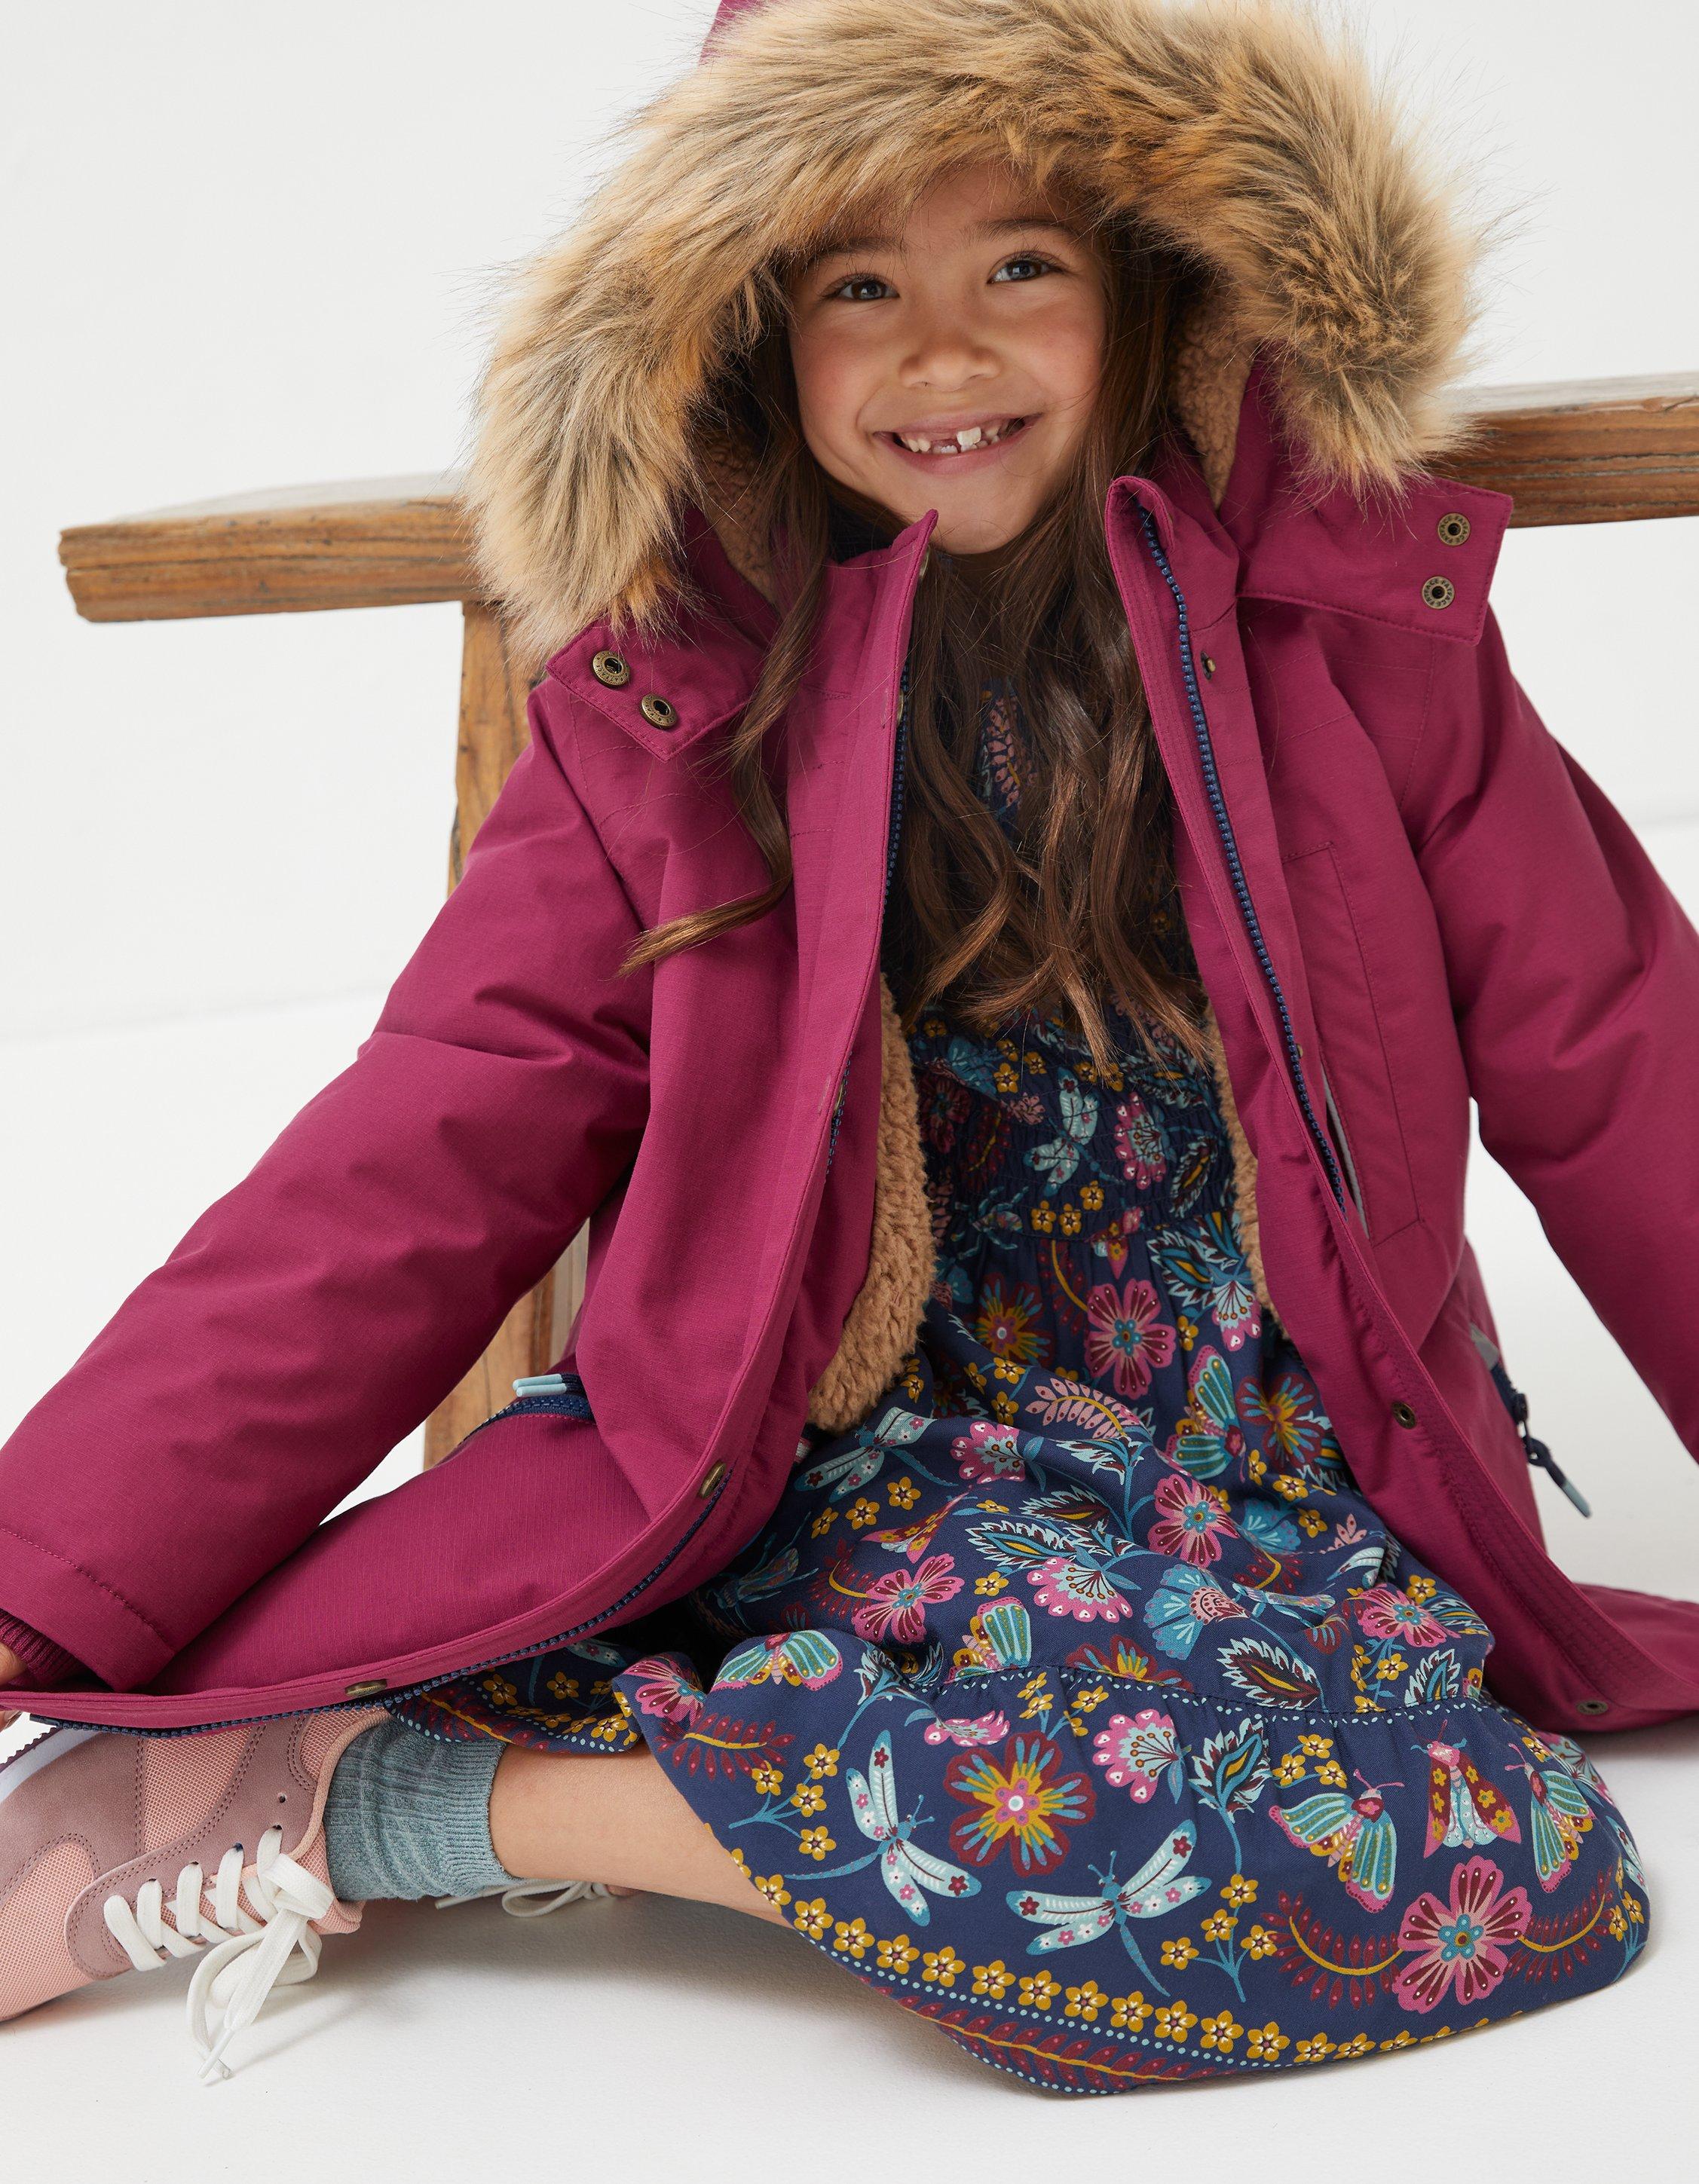 PowerFul-LOT,Girls Clothes 5-6 Years Sale,Girls Coats 6-7 Years